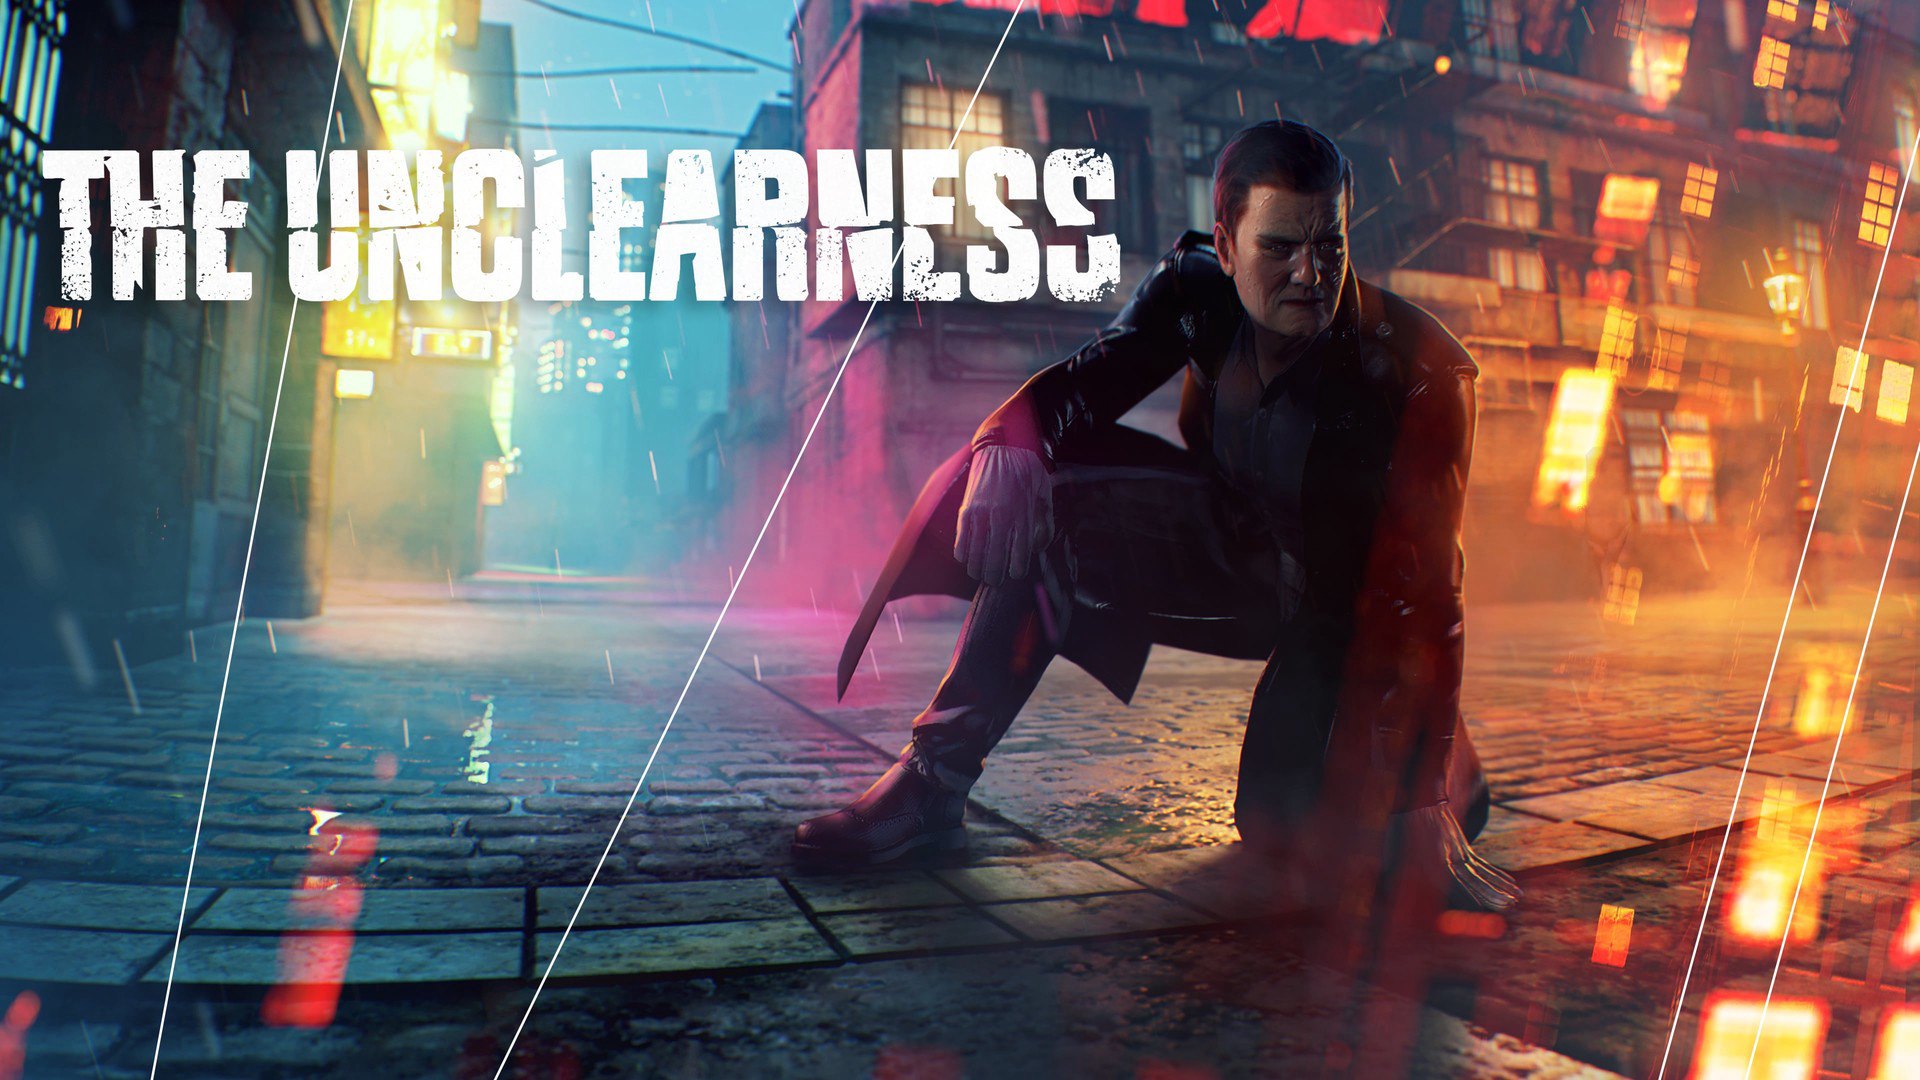 THE UNCLEARNESS Steam CD Key [USD 6.77]